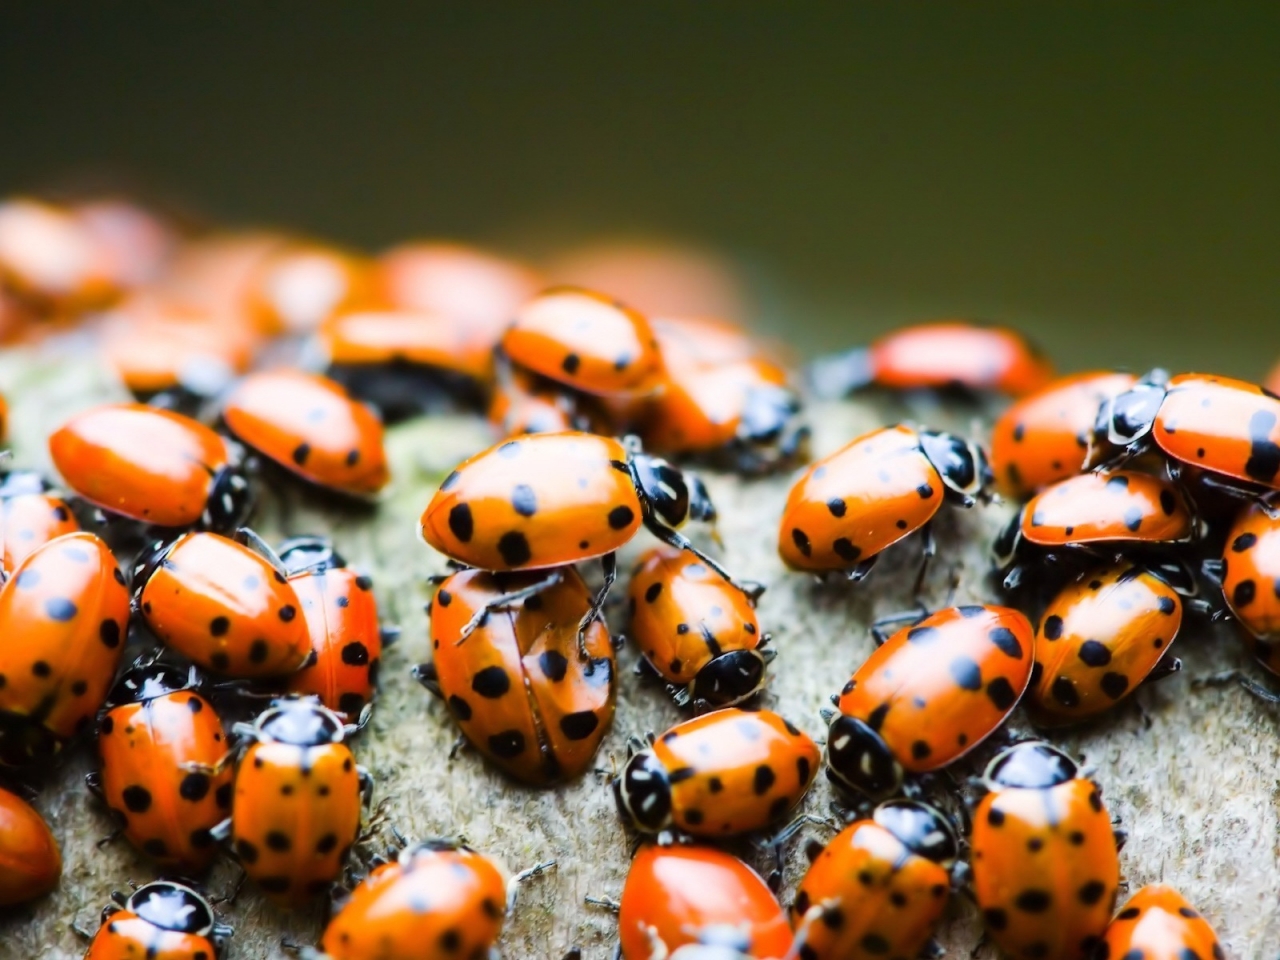 Lady bugs for 1280 x 960 resolution